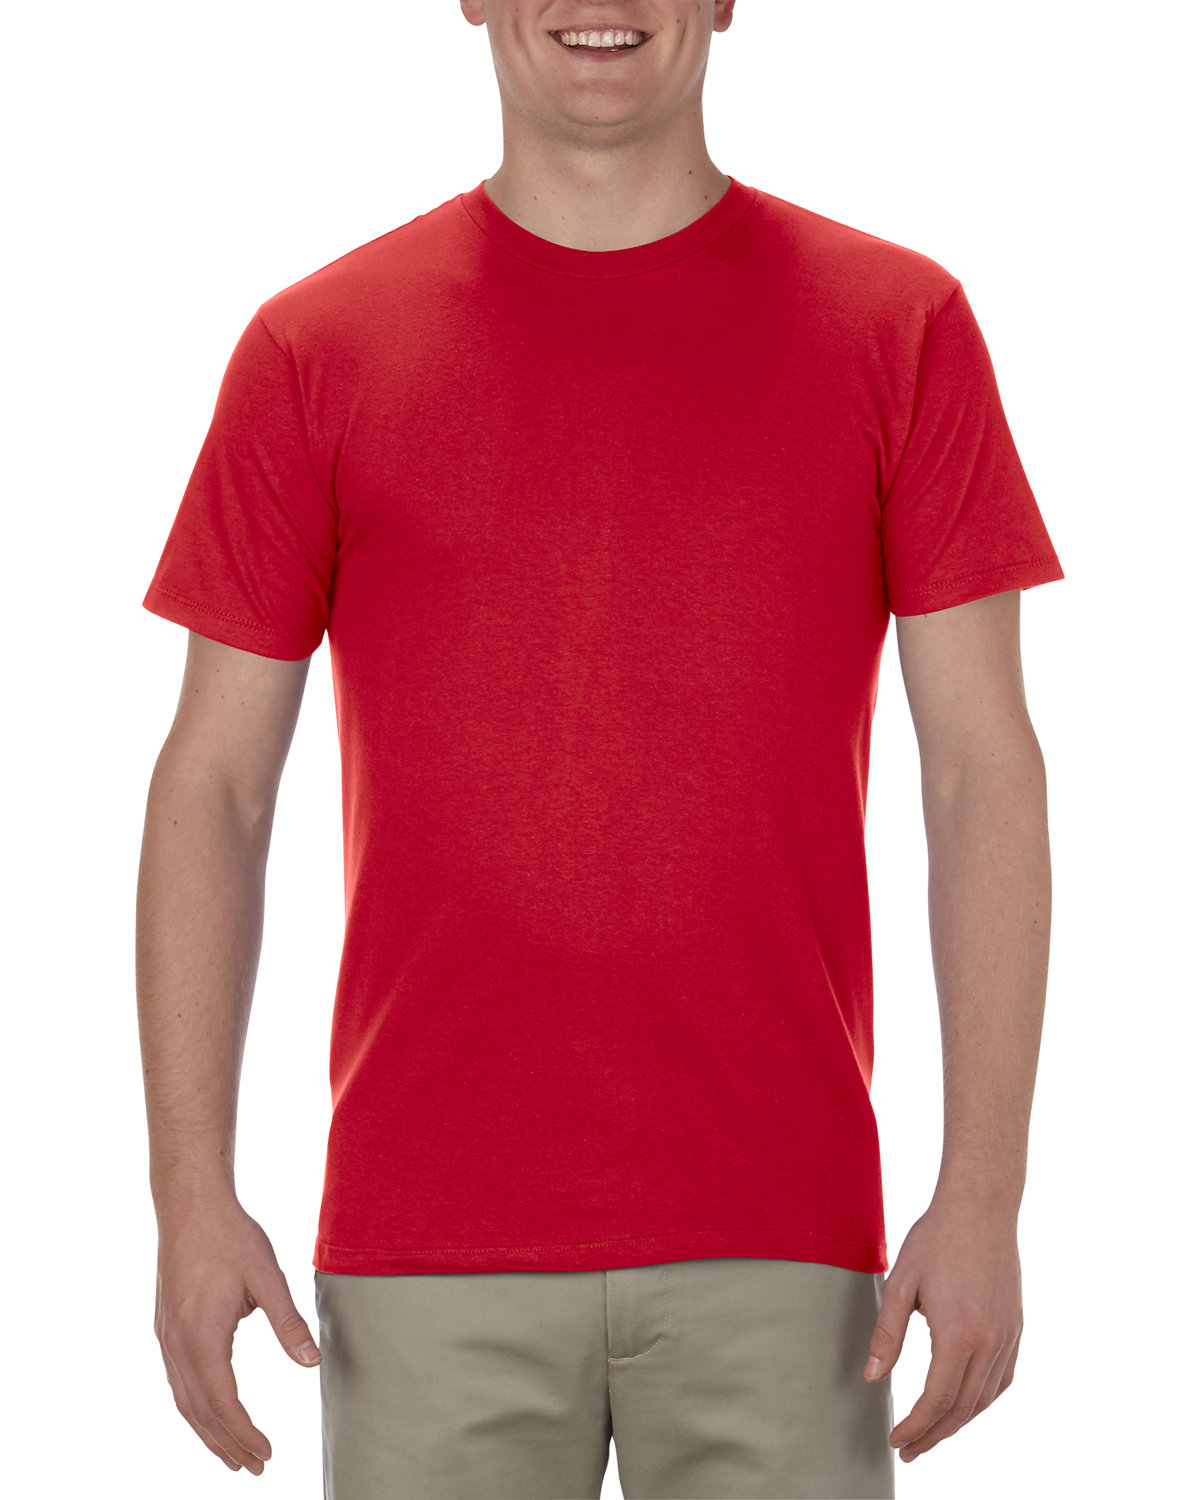 Alstyle Adult 4.3 oz., Ringspun Cotton T-Shirt RED 